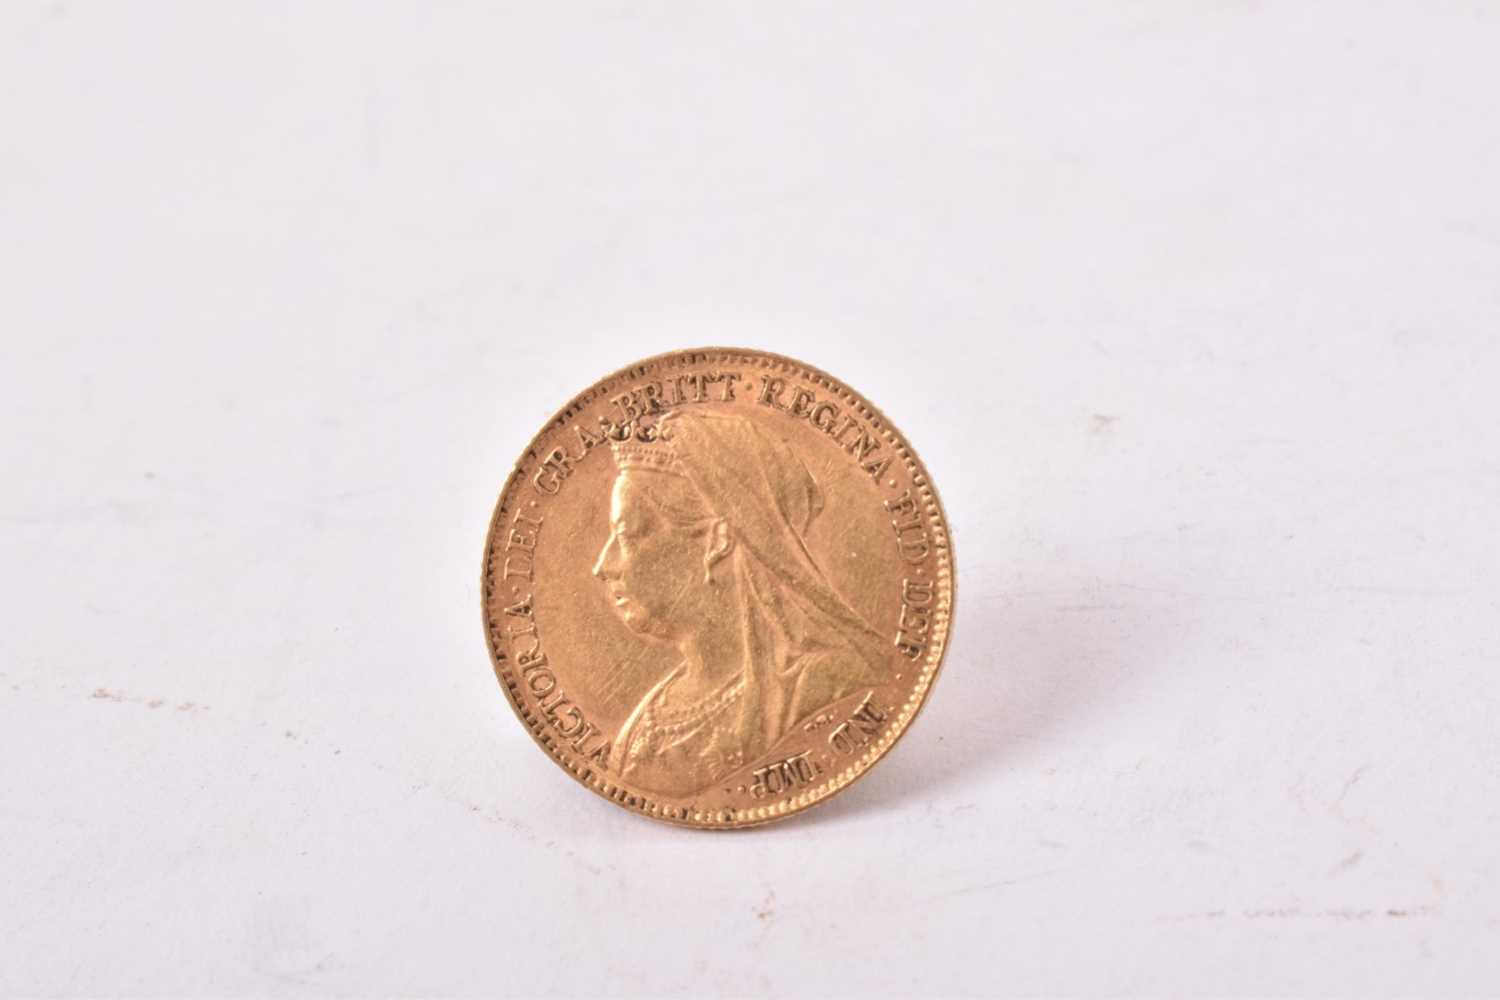 G.B. - Gold Half Sovereign Victoria OH 1894 GF (1 coin) - Image 2 of 2